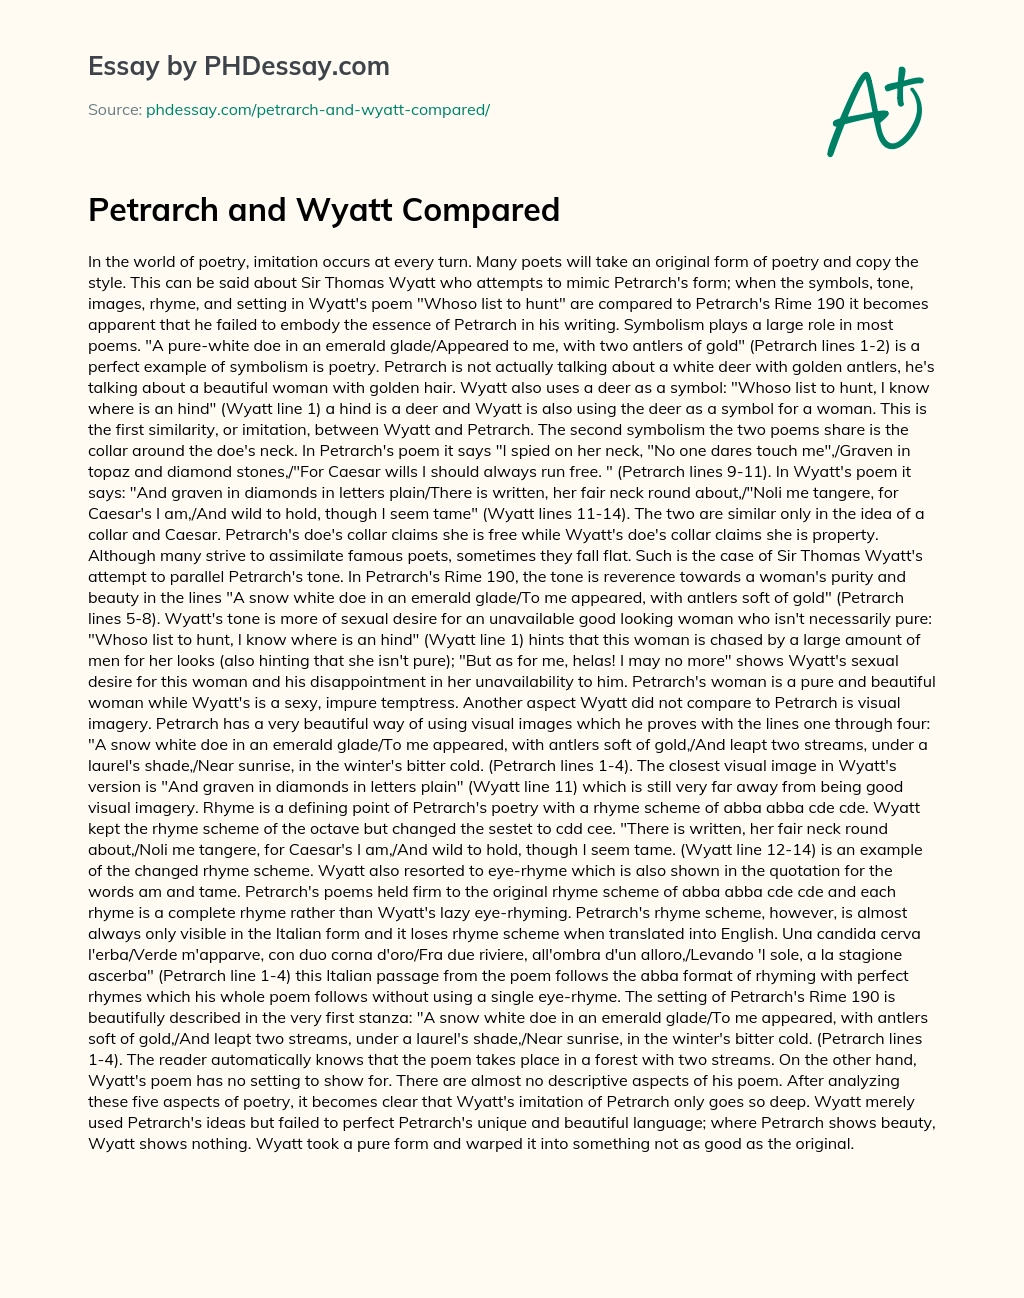 Petrarch and Wyatt Compared essay